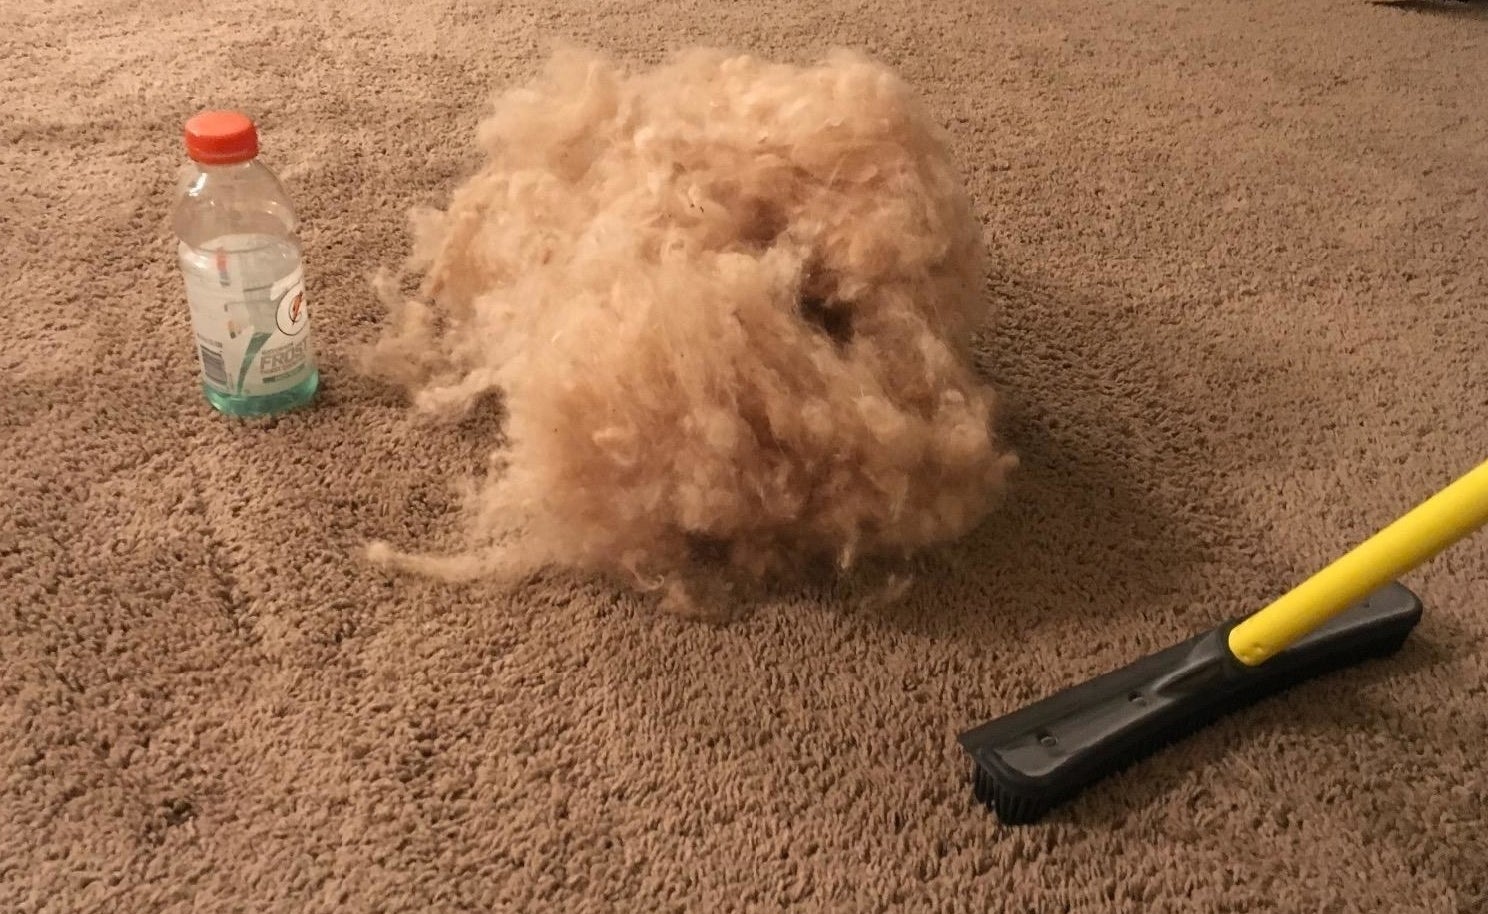 The broom sweeping up a huge pile of dog fur from the carpet 